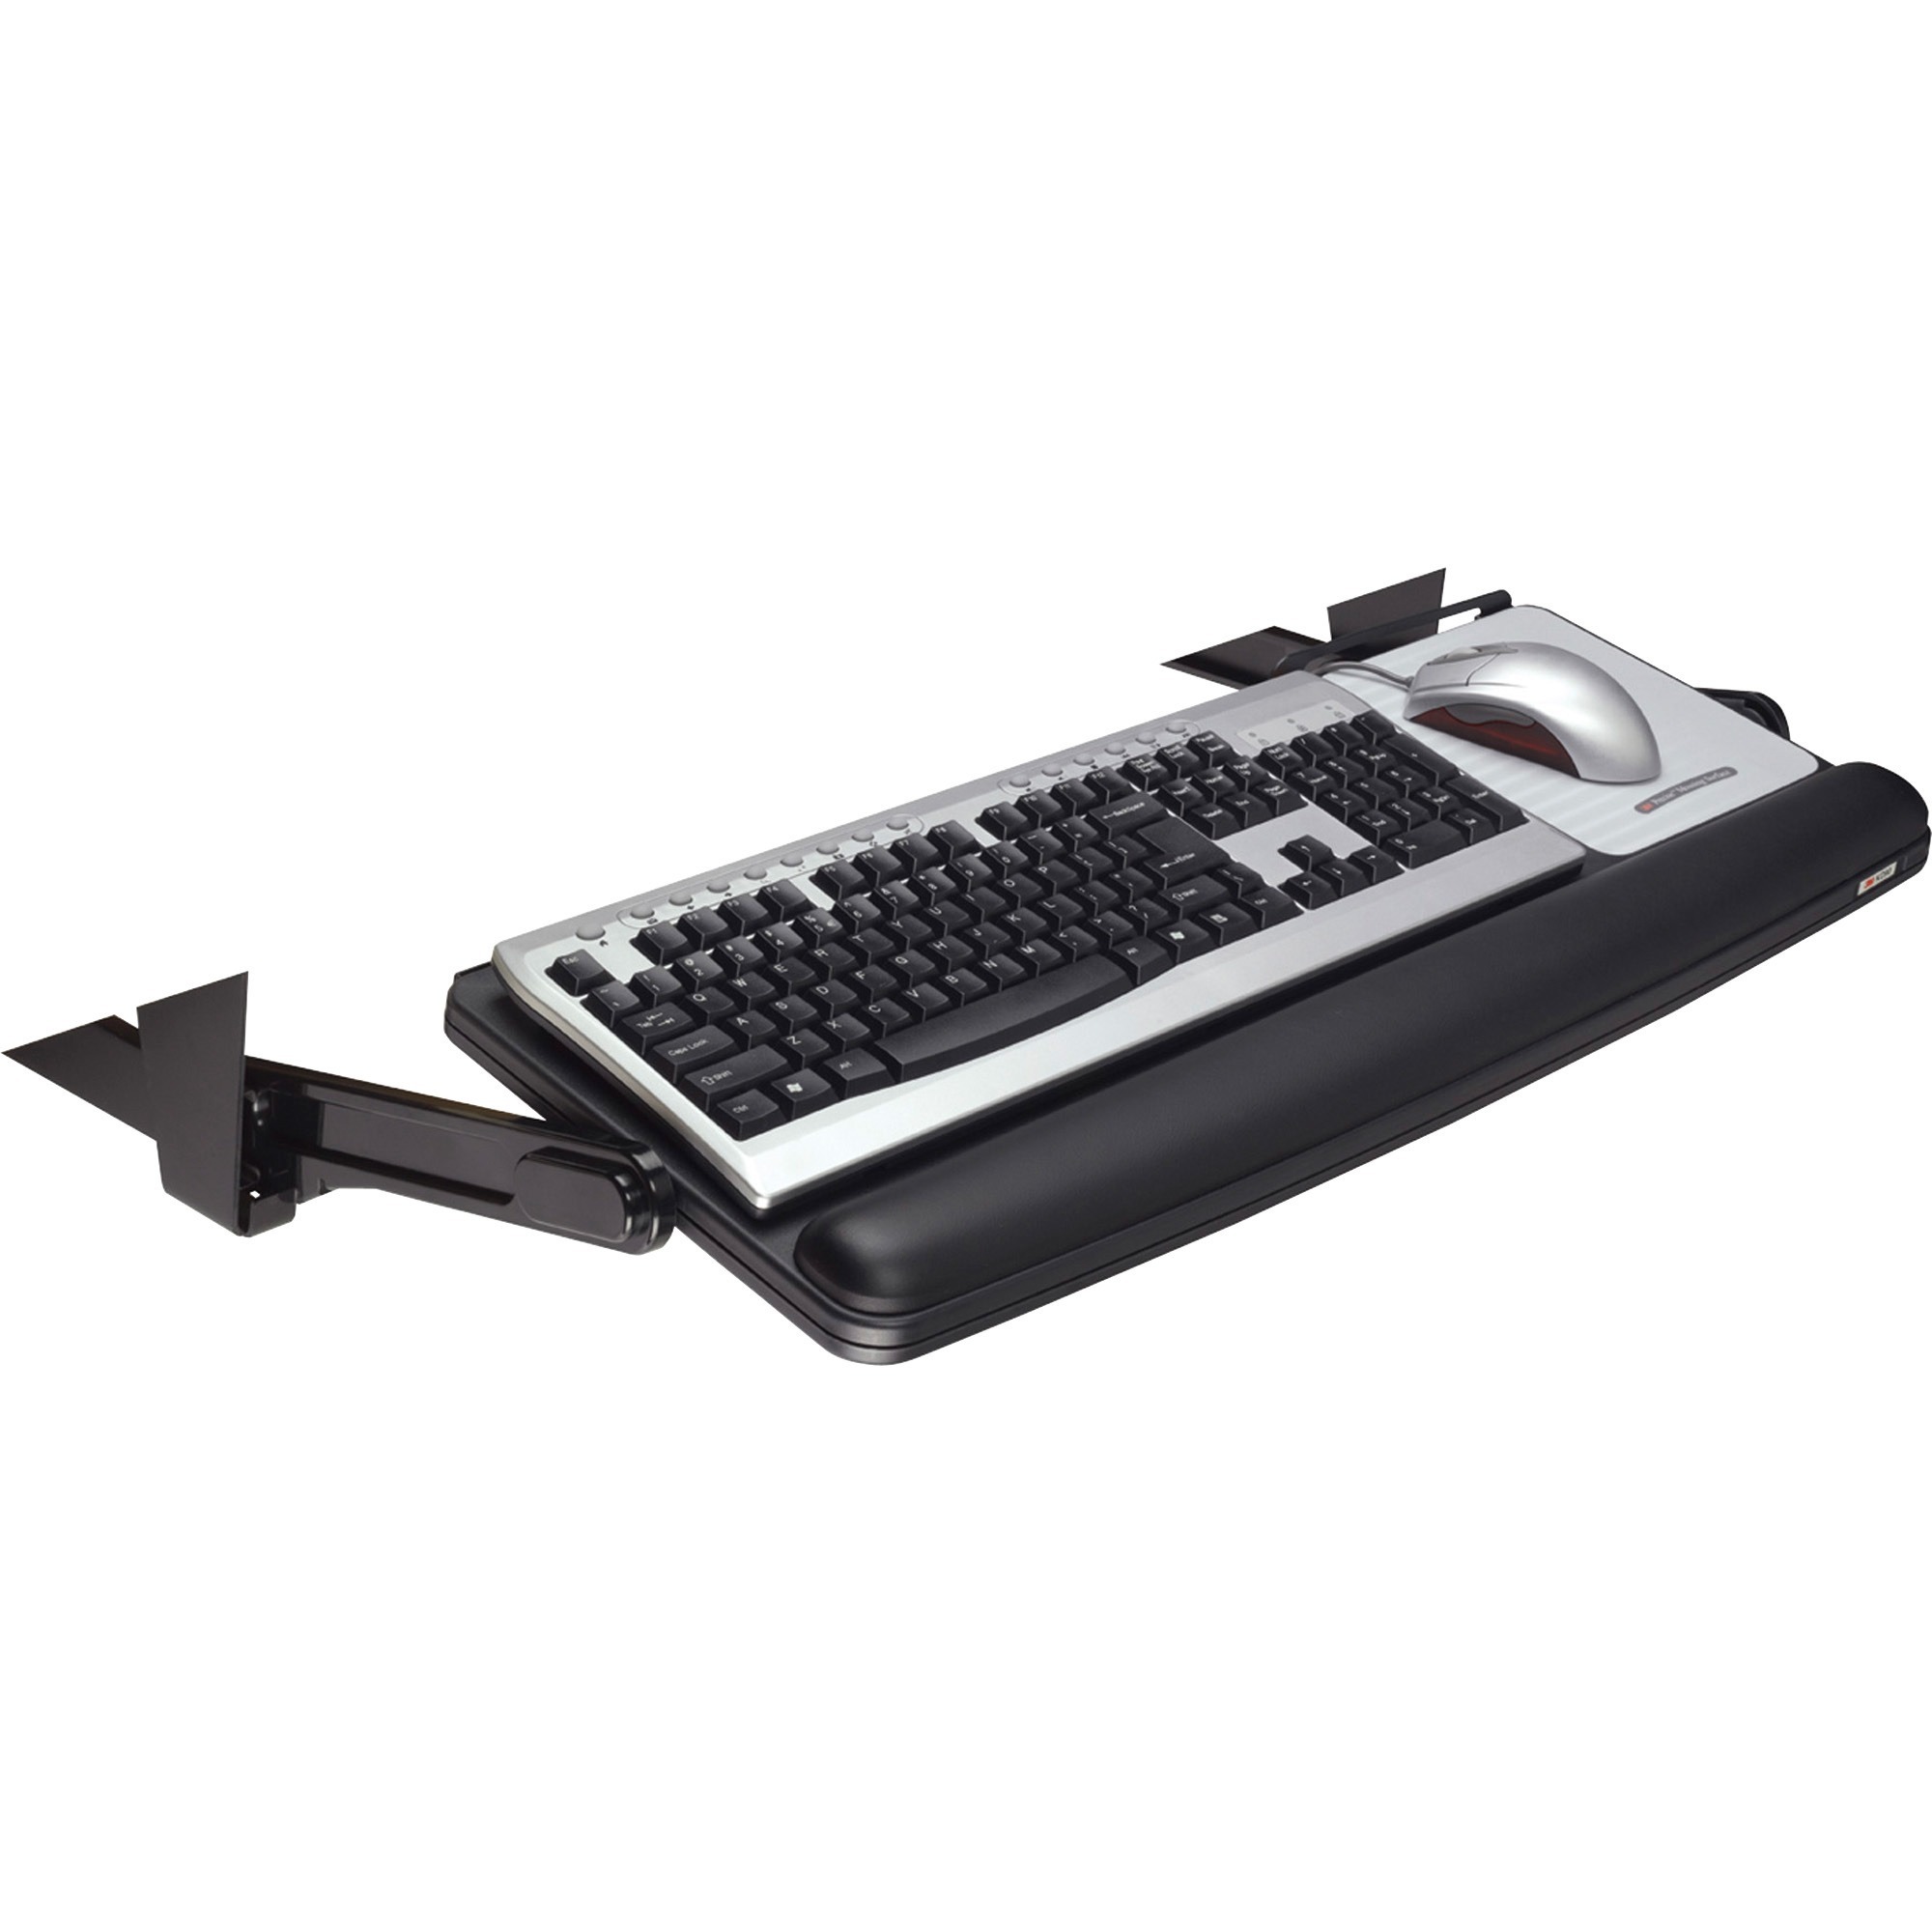 3M Compact Gel Keyboards Wrist Rest With Antimicrobial Protection